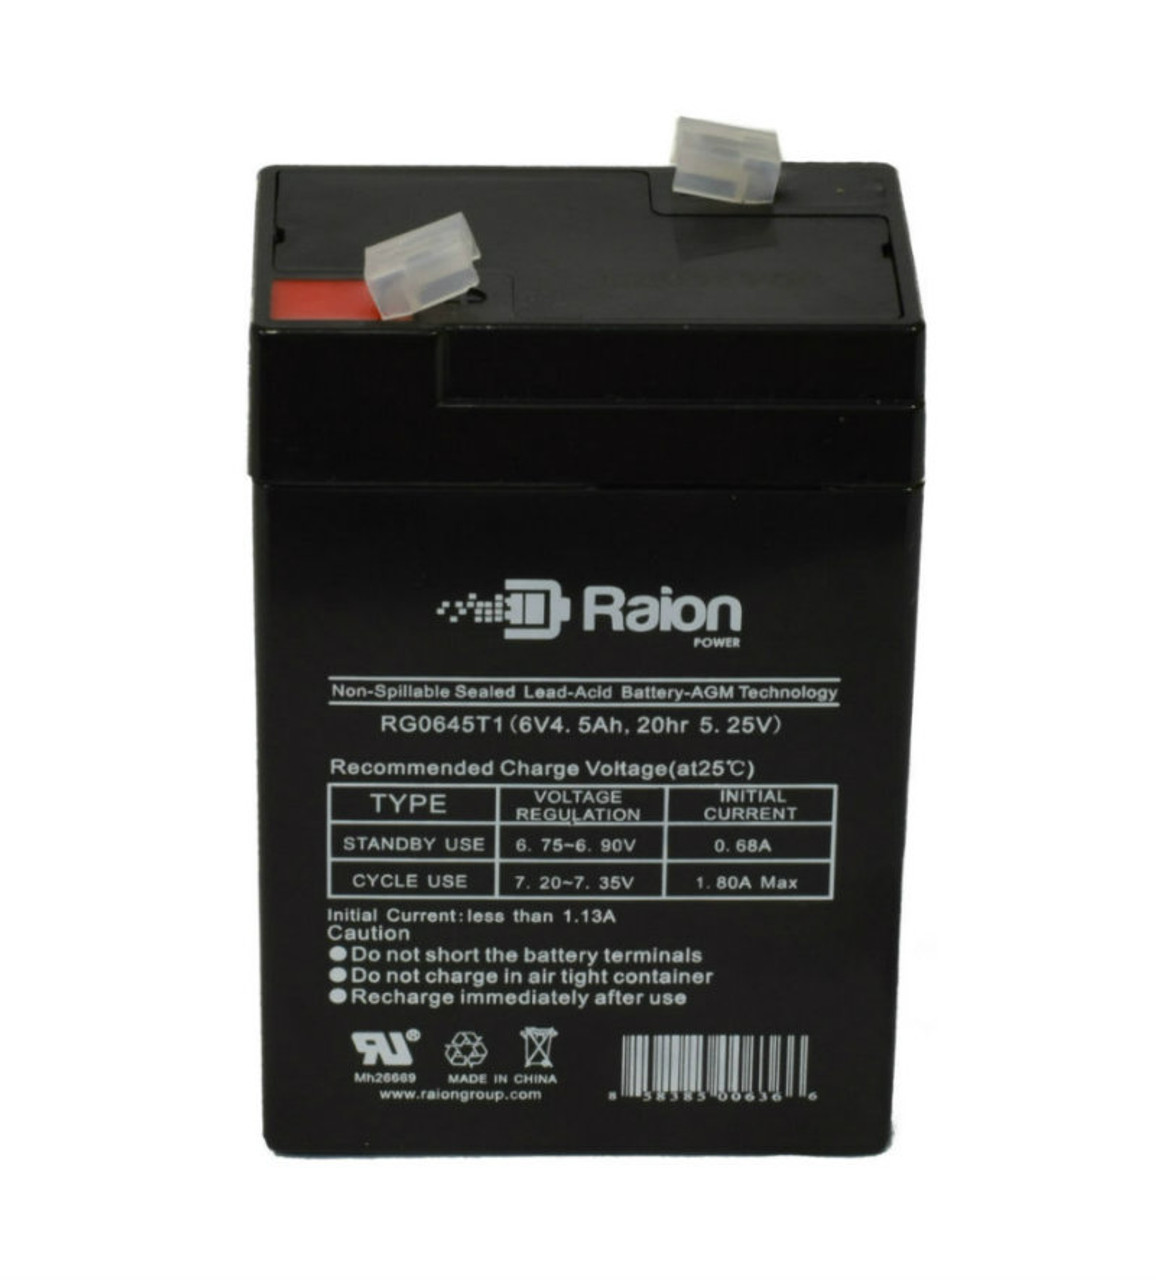 Raion Power RG0645T1 Replacement Battery Cartridge for Baxter Healthcare 2001 MICROATE Infusion Pump